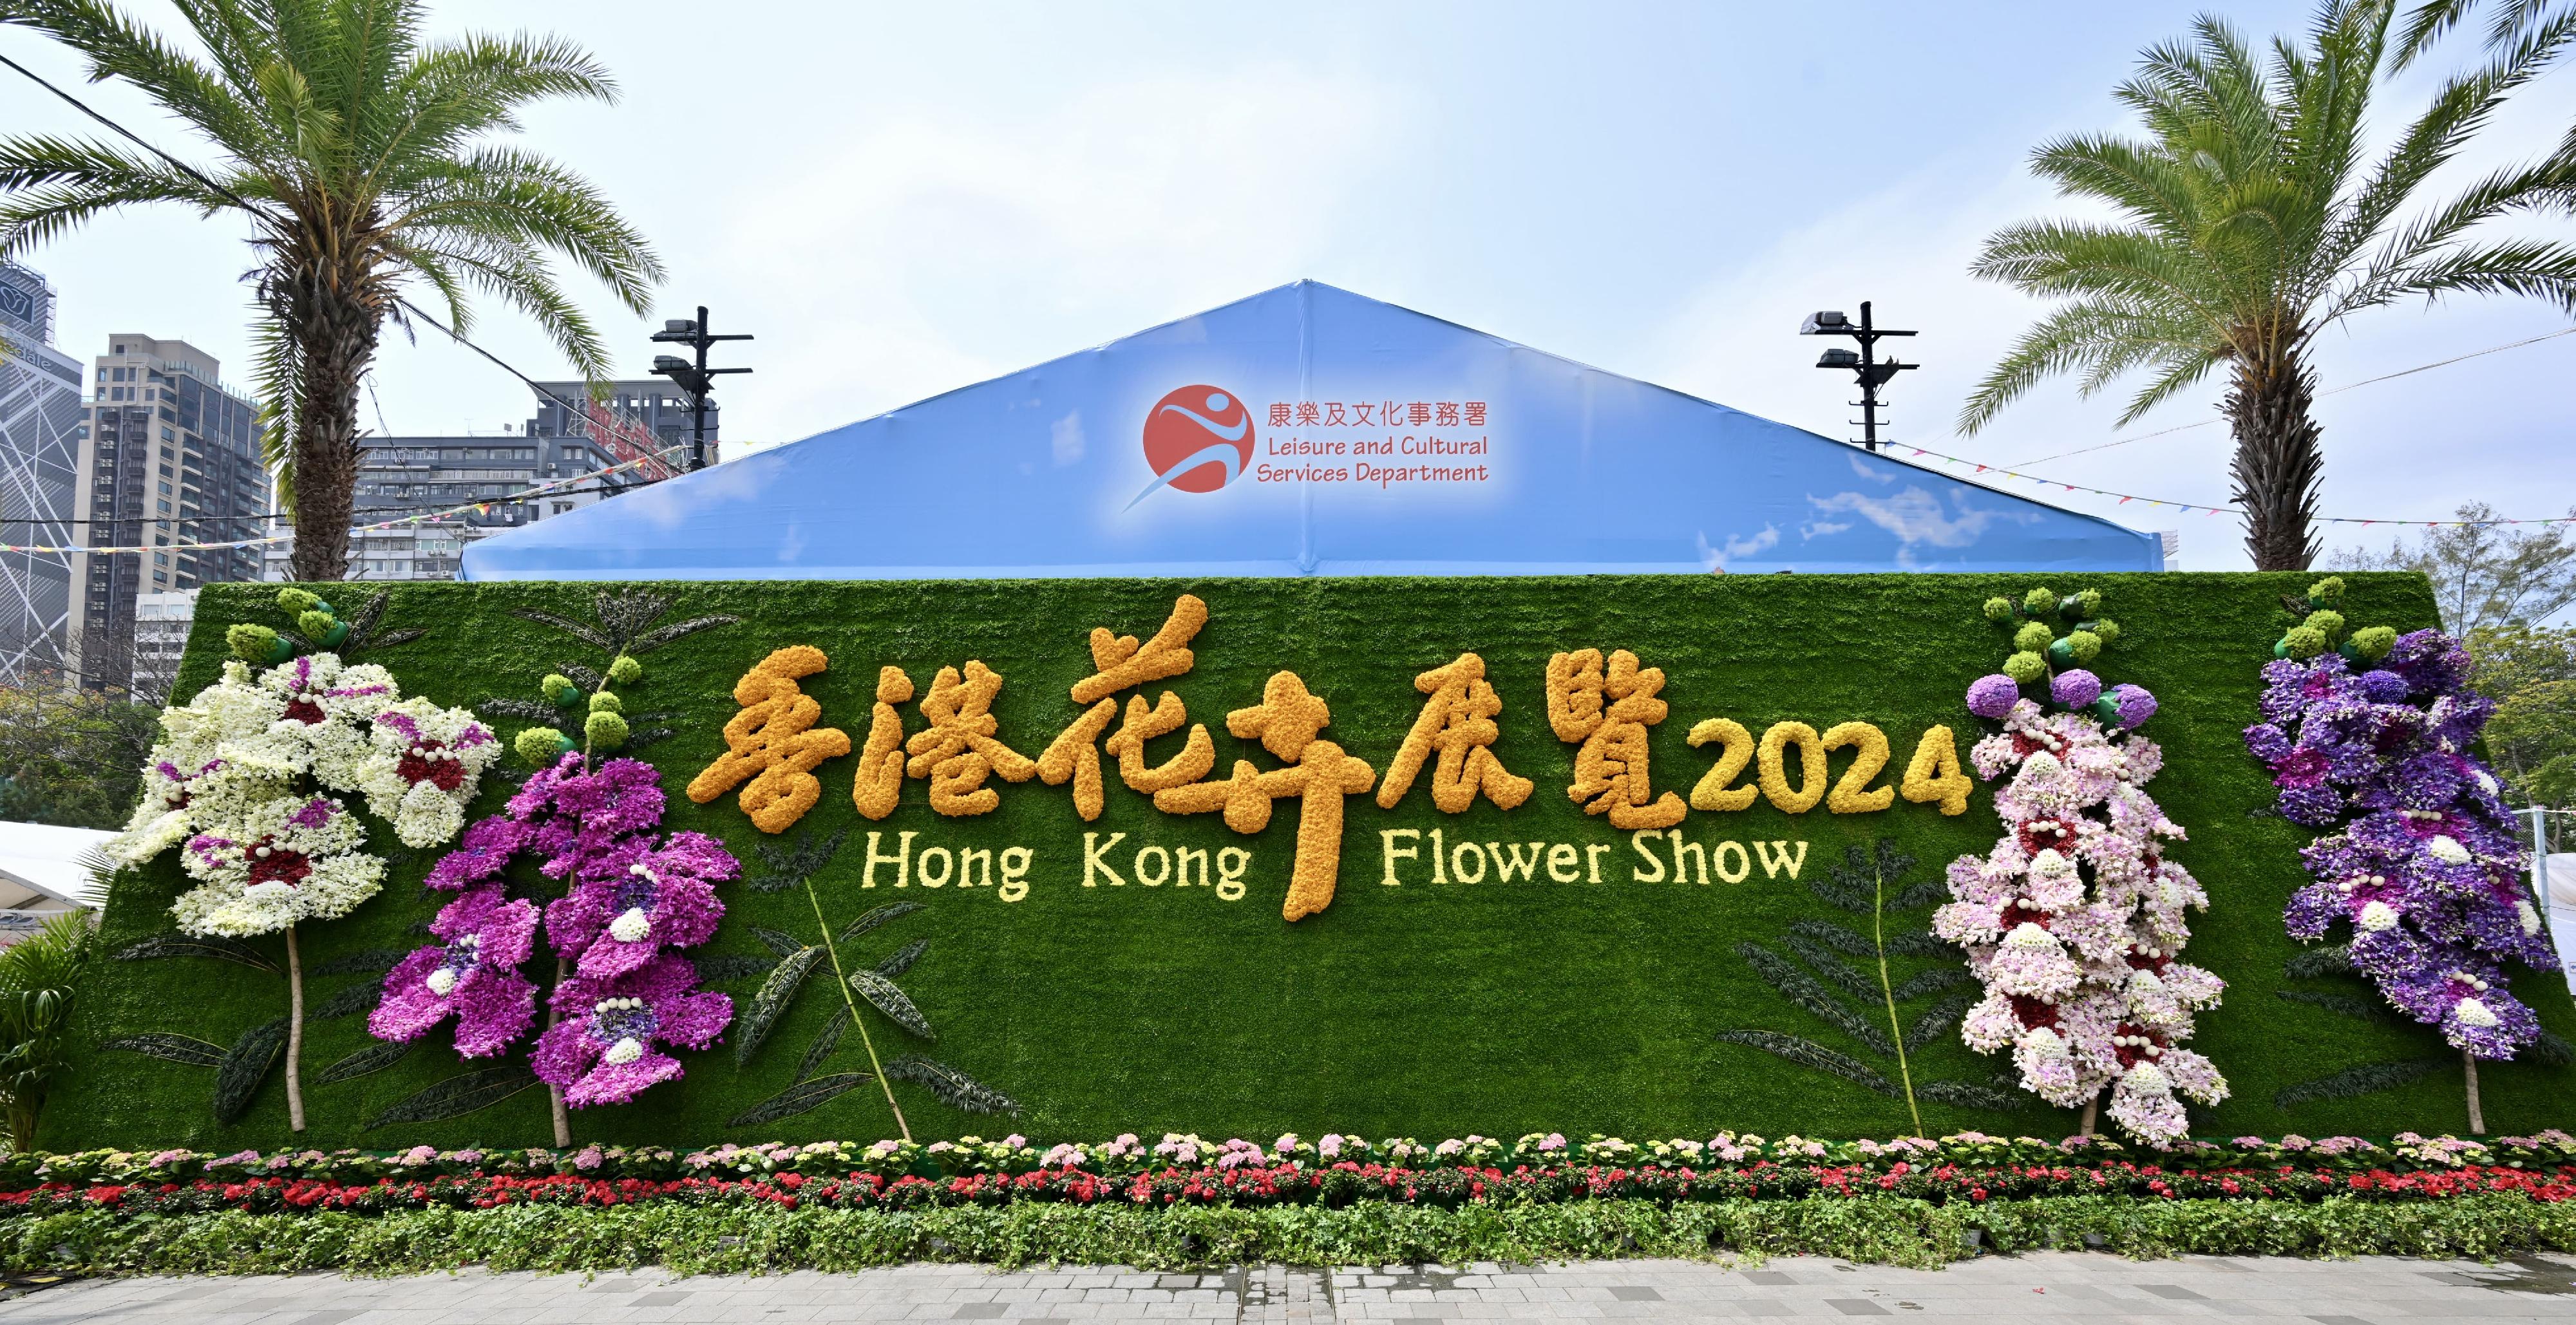 The Hong Kong Flower Show 2024 will be held at Victoria Park from tomorrow (March 15) until March 24. This year's flower show features "Floral Joy Around Town" as the main theme and angelonia as the theme flower. Photo shows an eye-catching three-dimensional flower wall which features four giant angelonia models embedded with orchids of different colours.